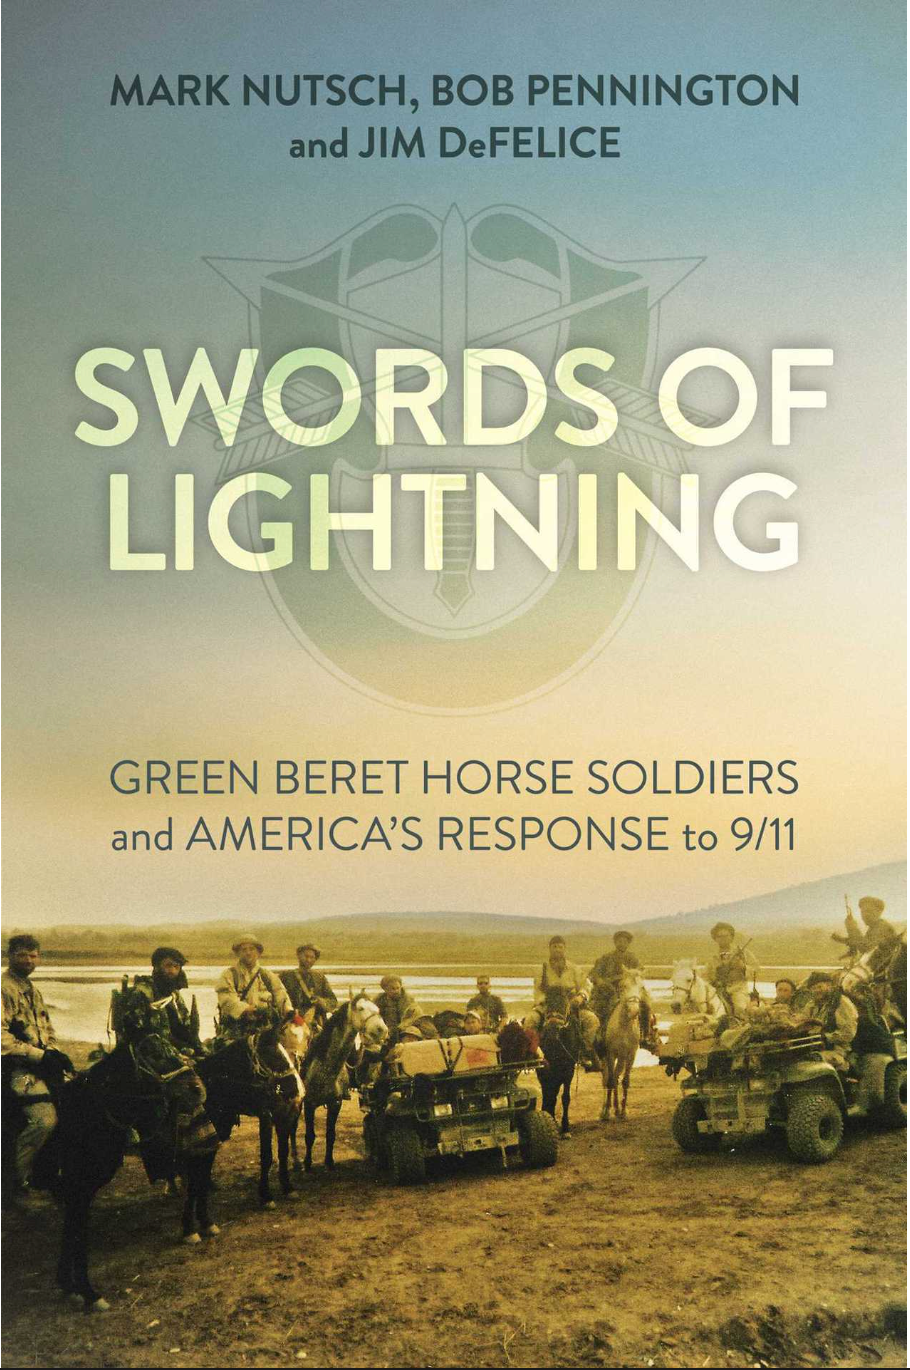 Swords of Lightning: Green Beret Horse Soldiers and America's Response to 9/11